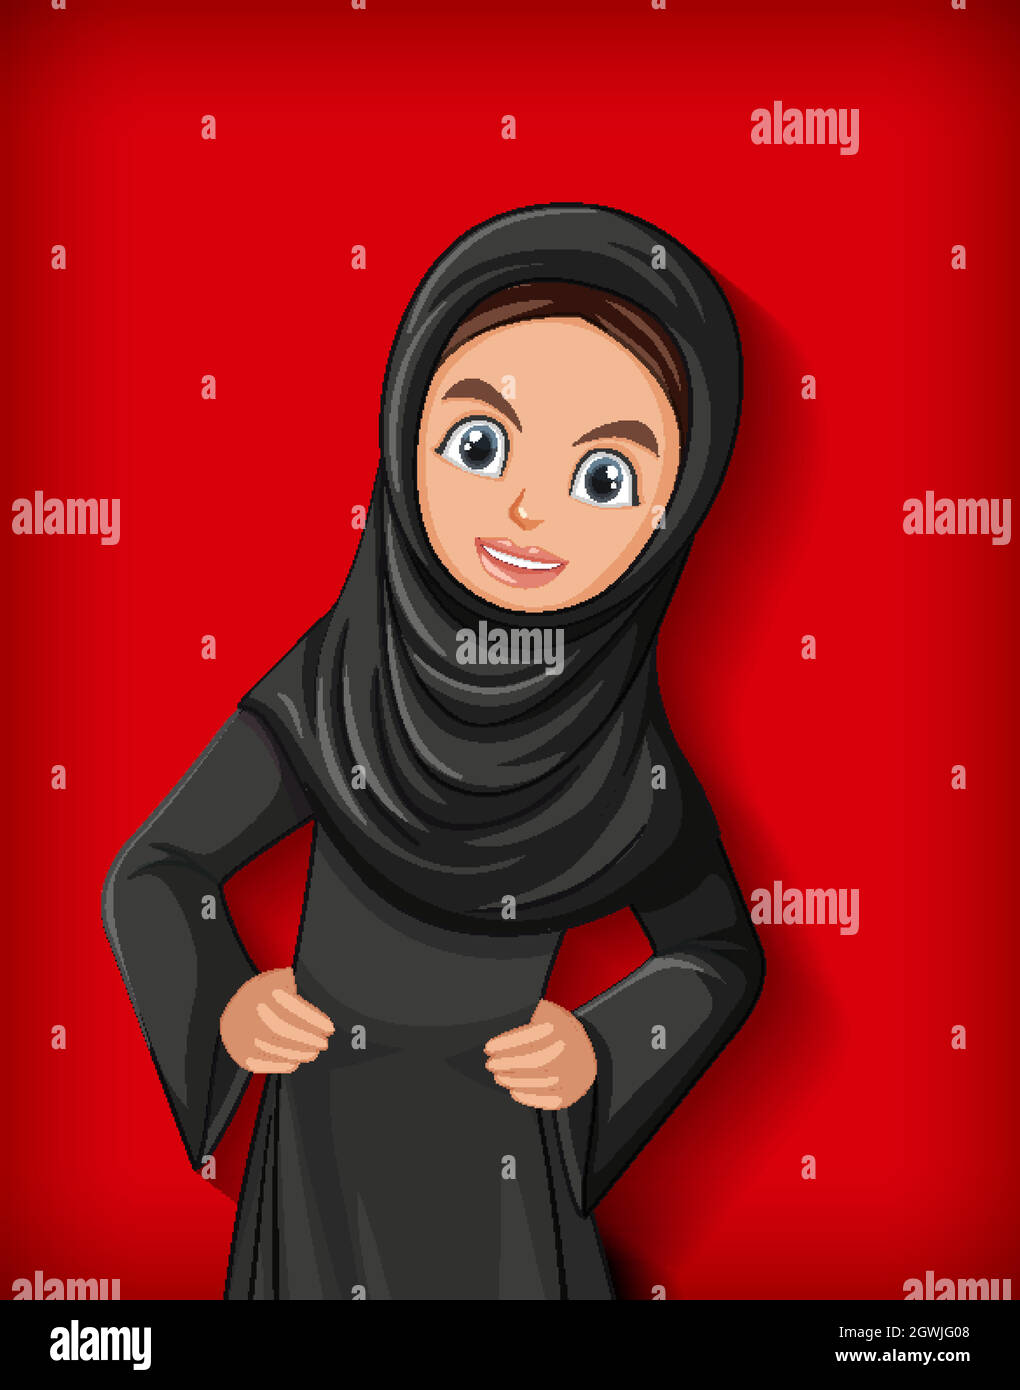 Arabic youth Stock Vector Images - Alamy